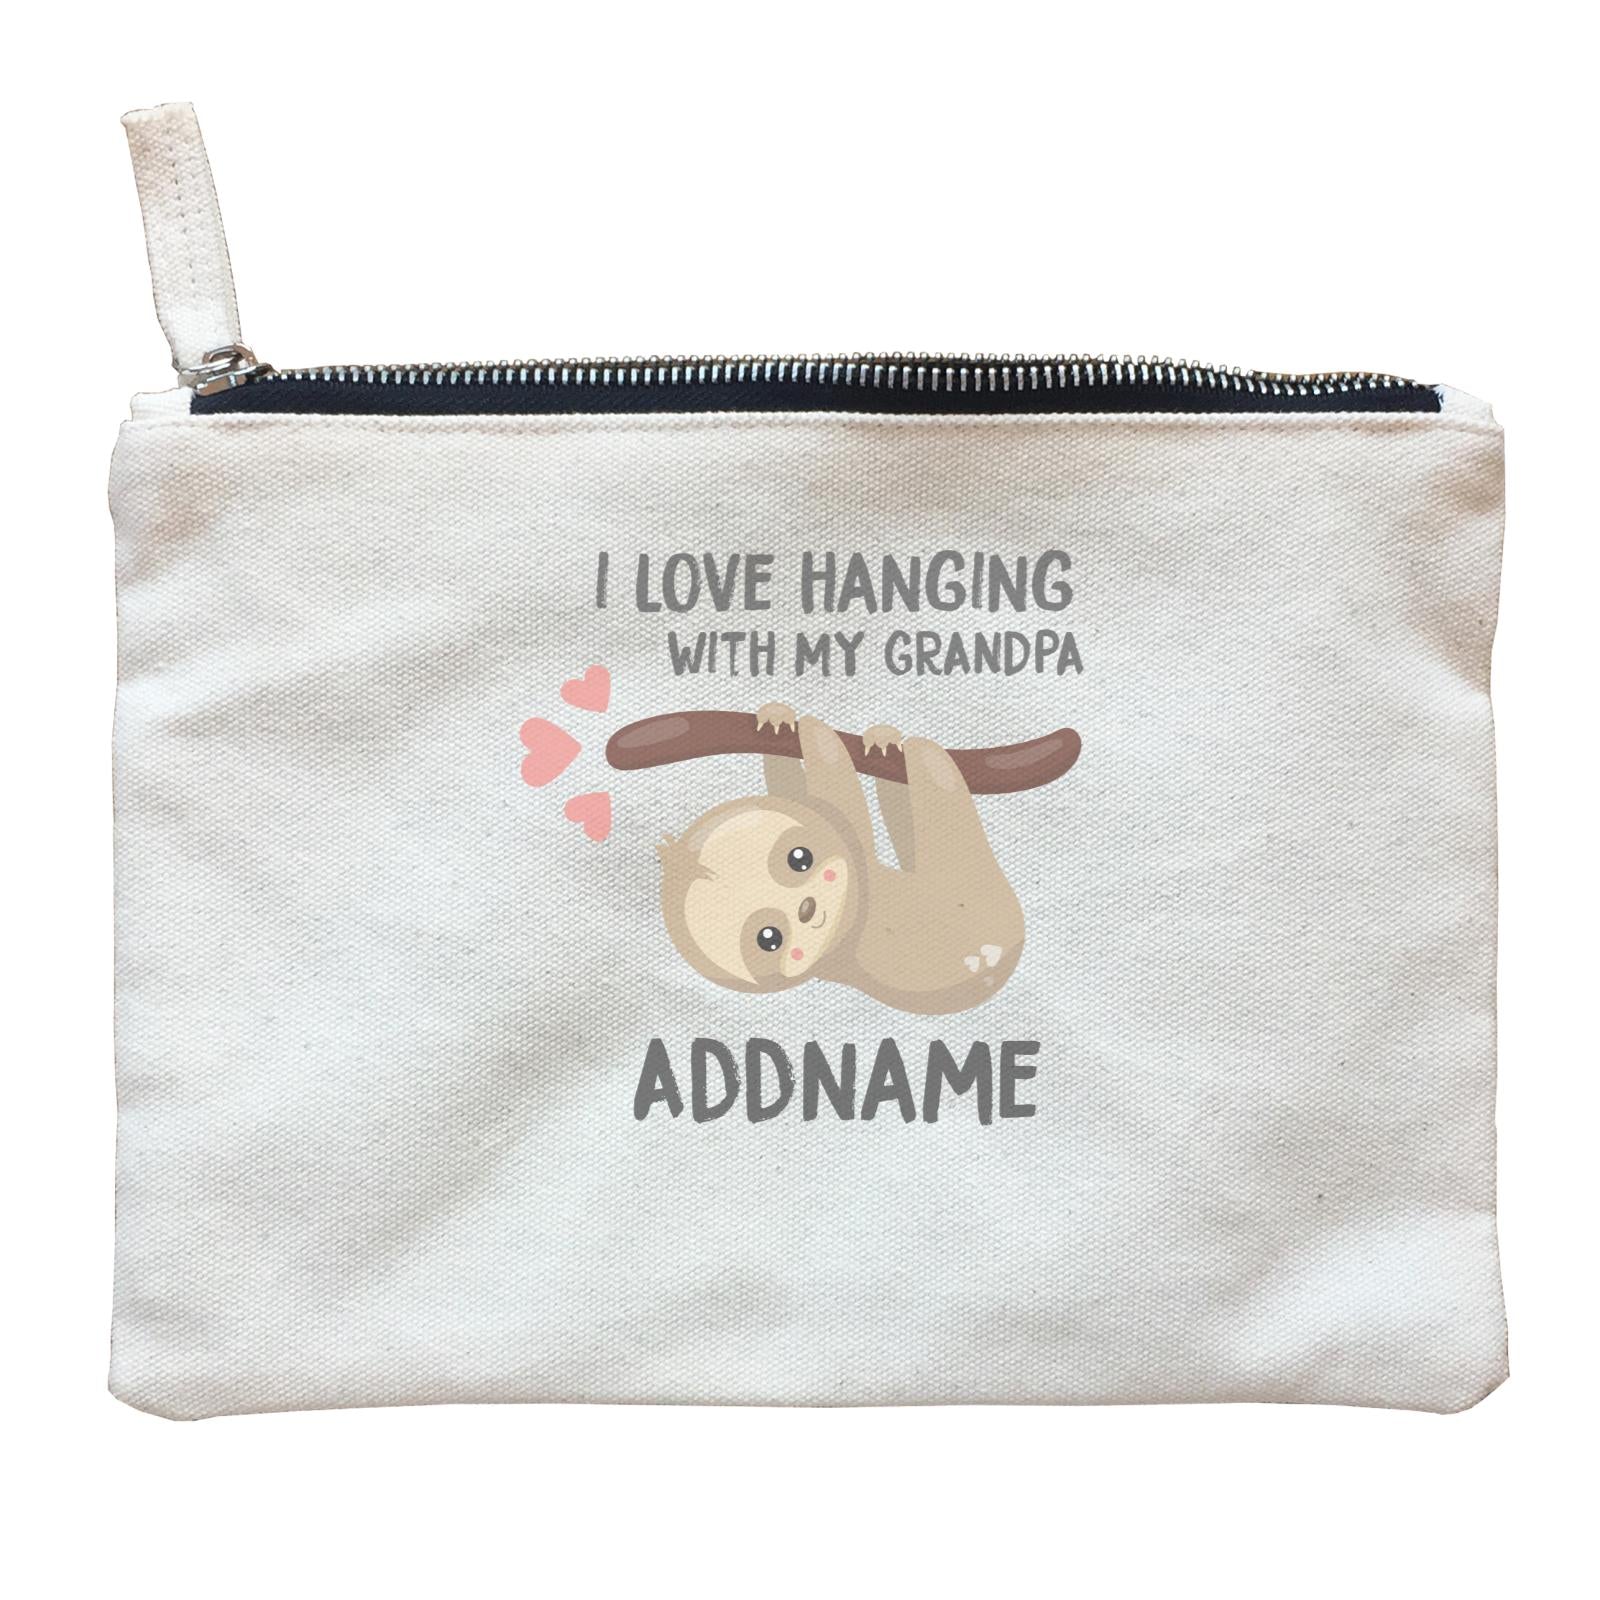 Cute Sloth I Love Hanging With My Grandpa Addname Zipper Pouch